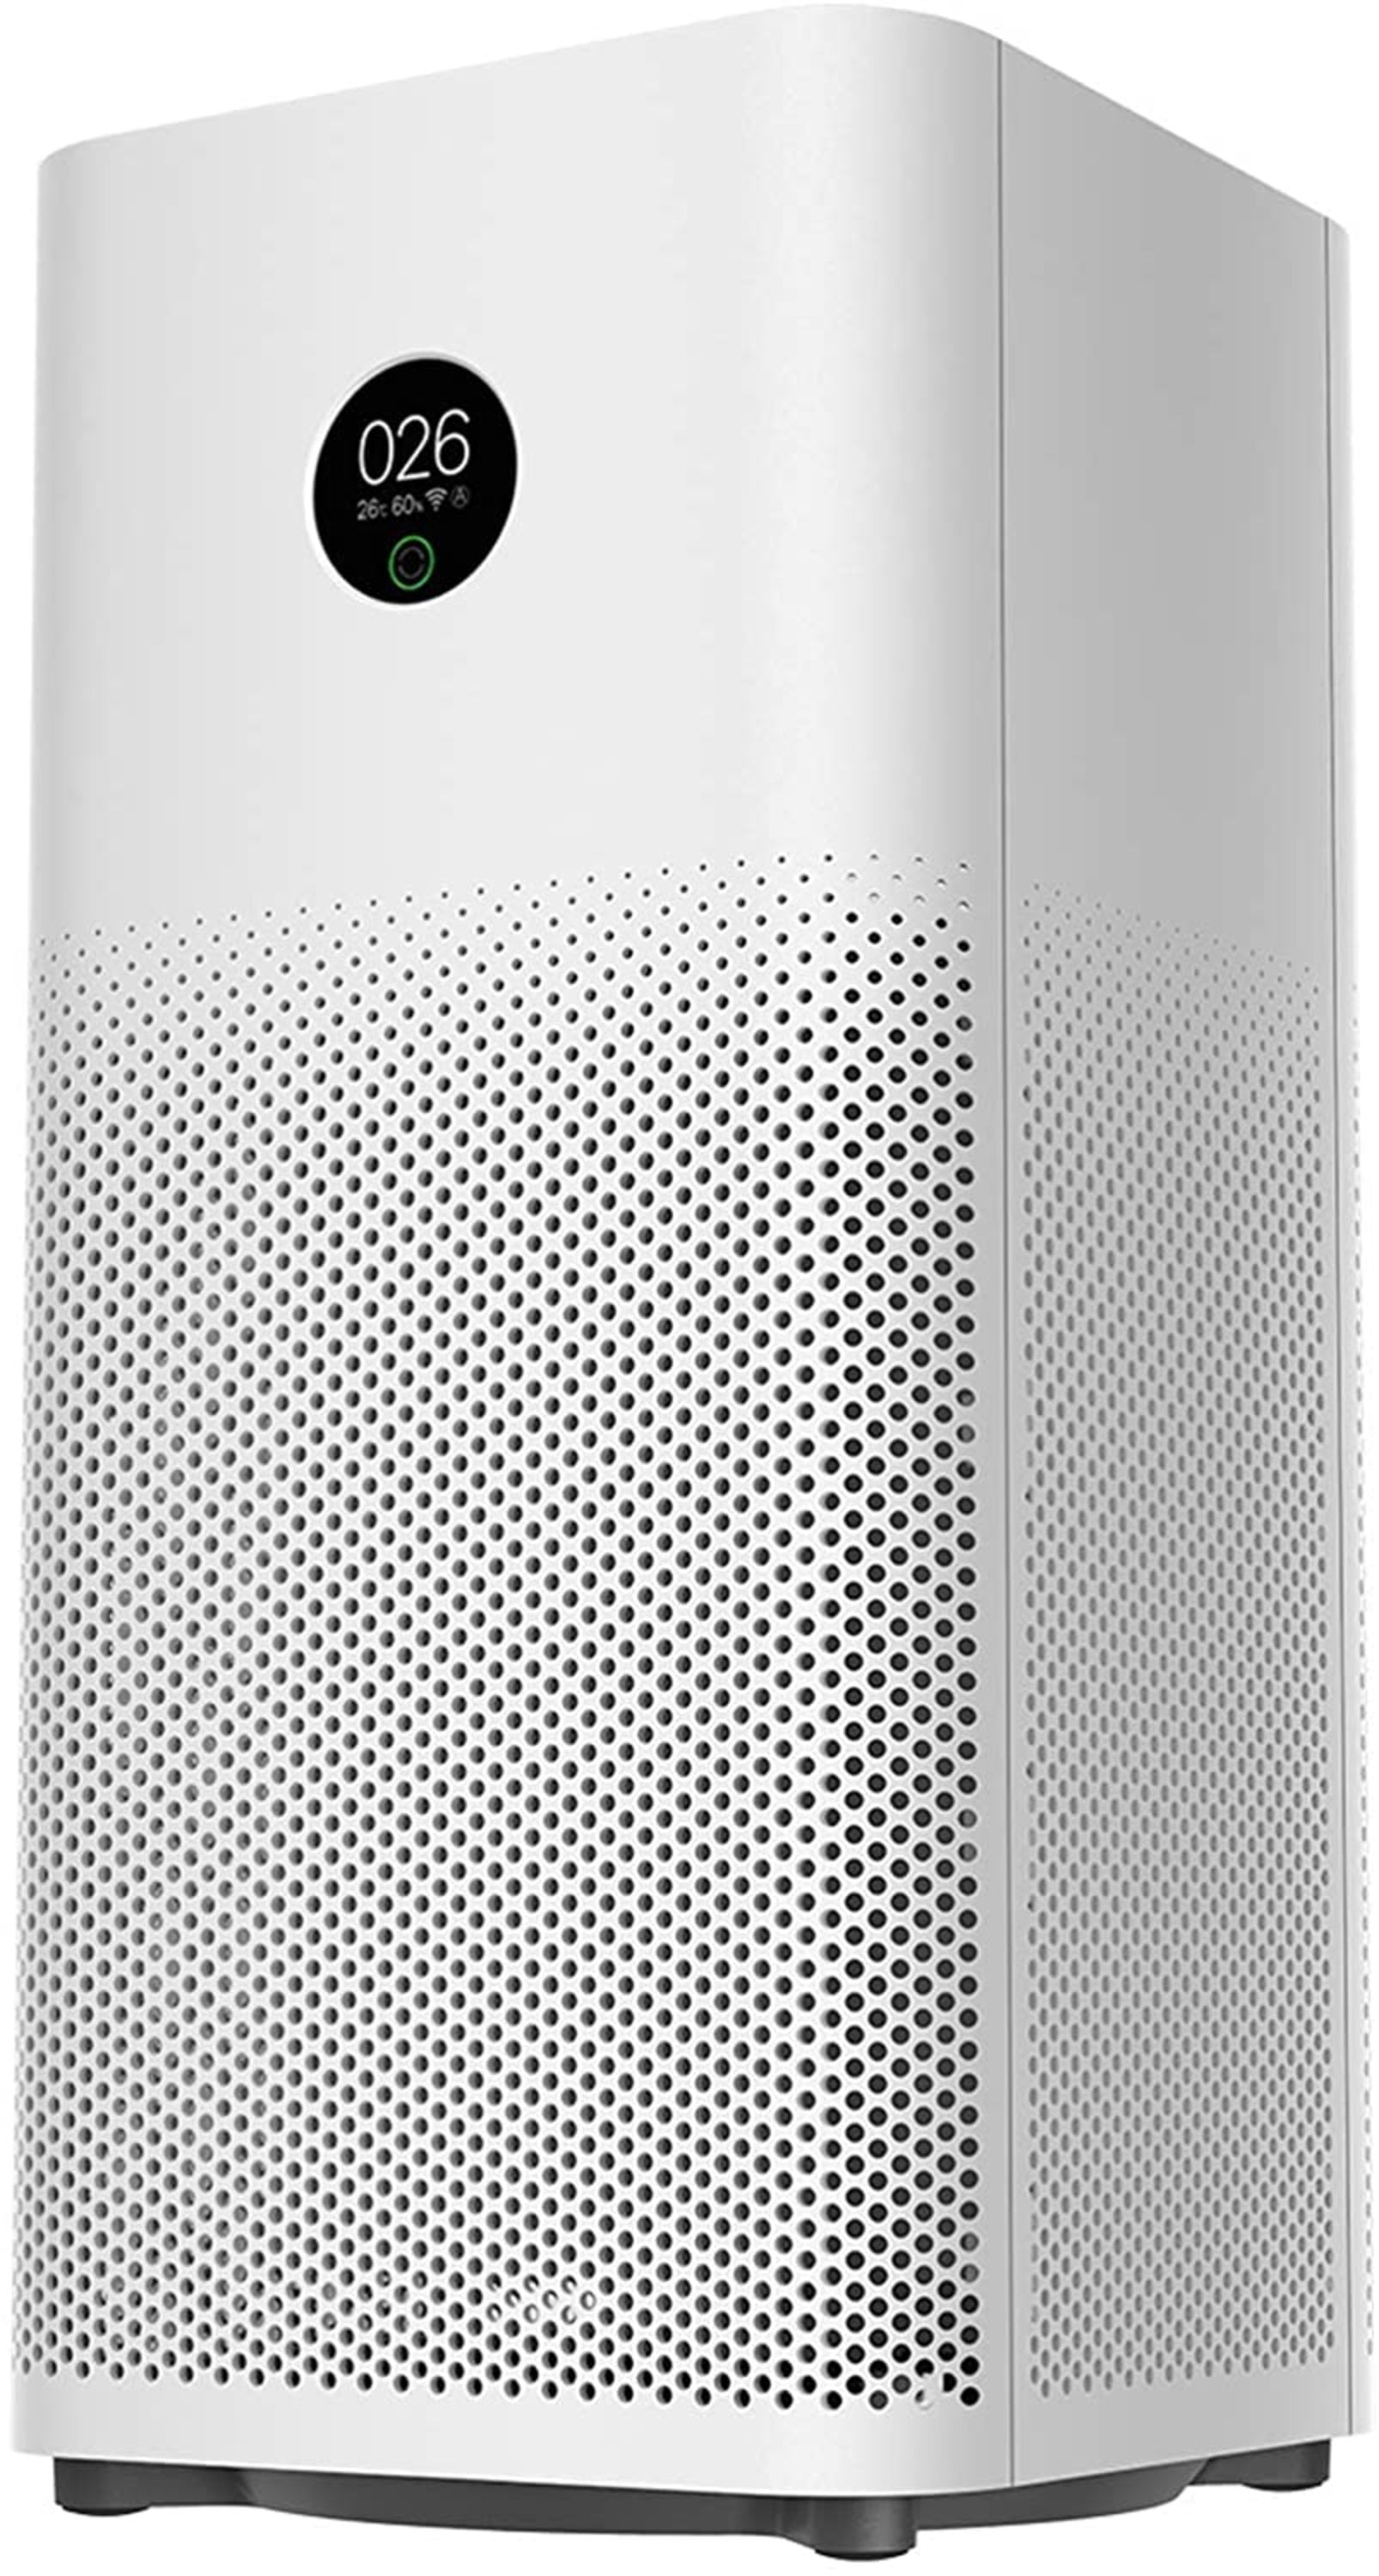 Xiaomi Mi Air Purifier for Home Large Room Bedroom, Monitor Quality with  PM2.5 Display, True H13 High Efficiency Filter, Model 3C - White